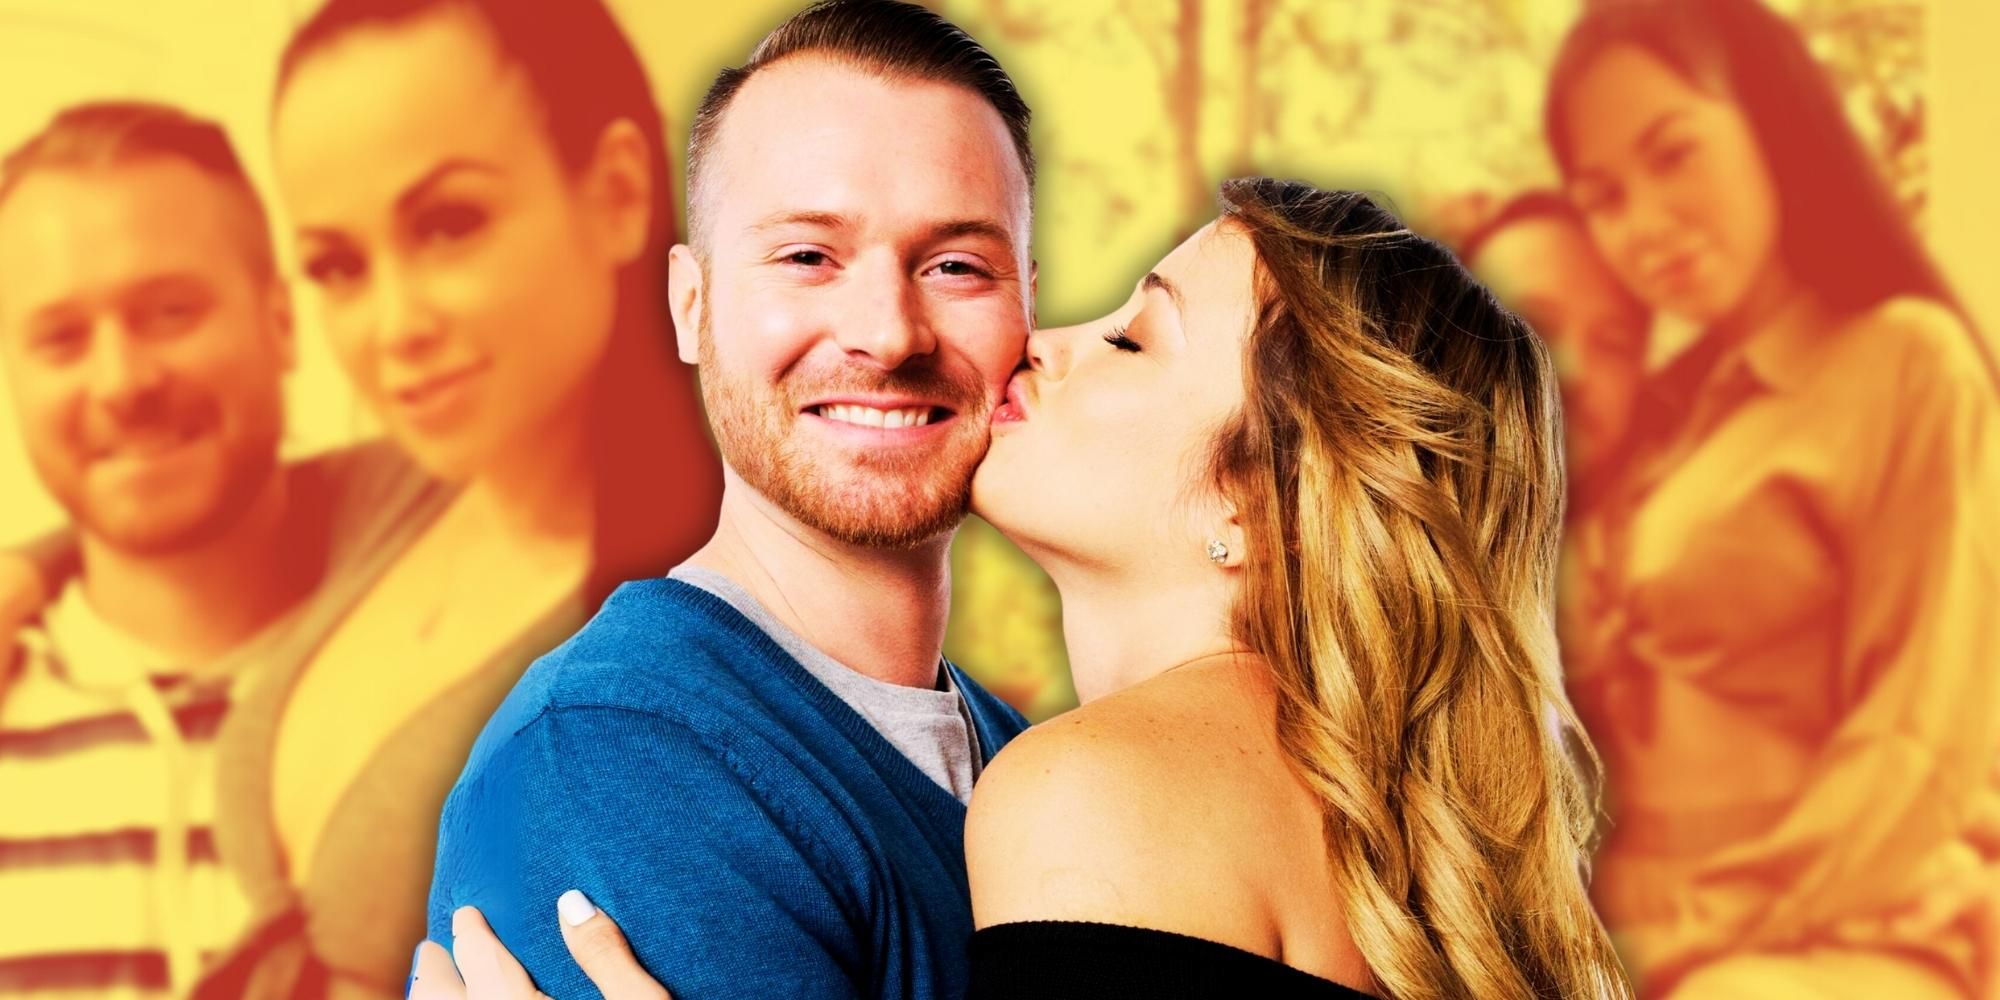 Montage of 90 Day Fiancé Season 1's Paola And Russ with her kissing him on the cheek and a yellow and orange background